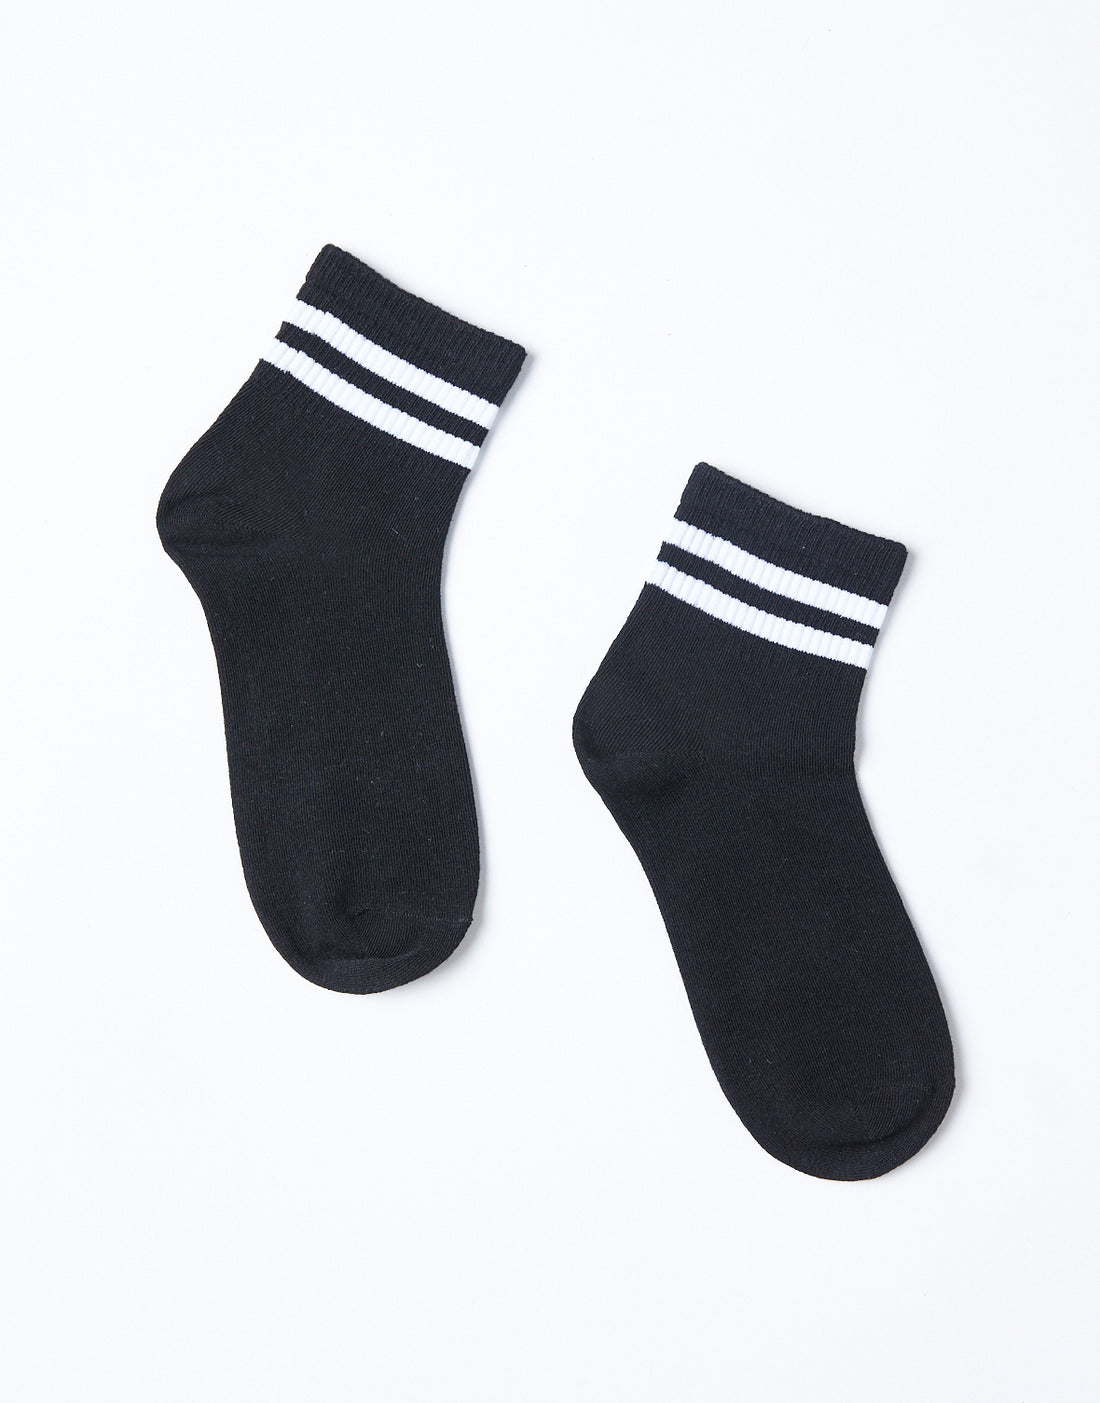 Striped Ankle Socks Accessories Black One Size -2020AVE